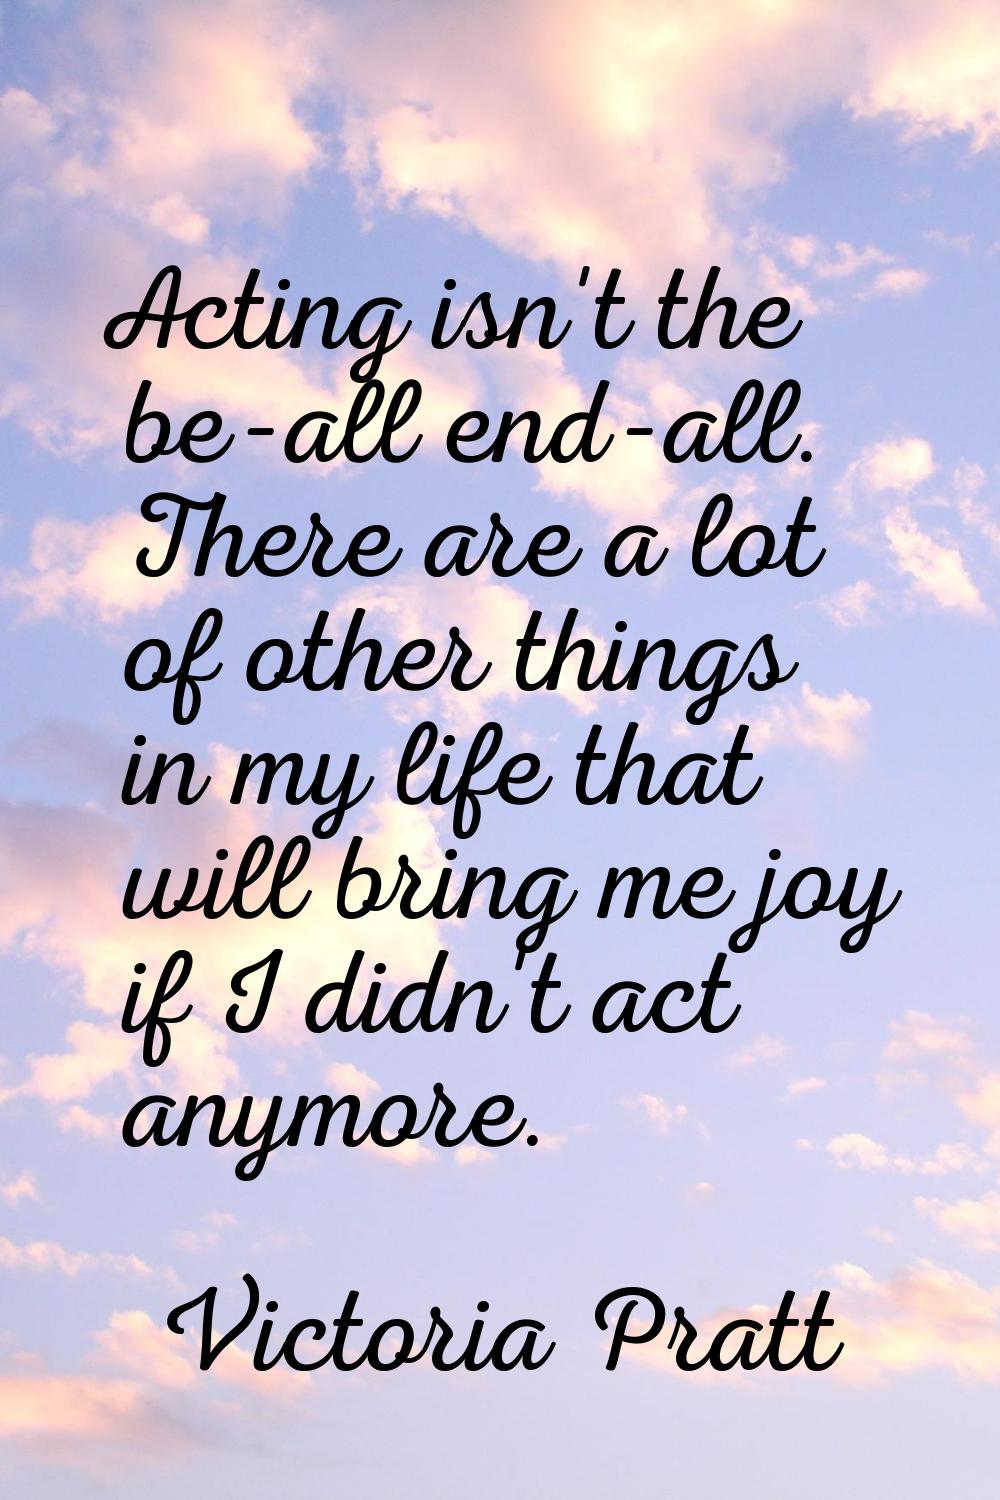 Acting isn't the be-all end-all. There are a lot of other things in my life that will bring me joy 